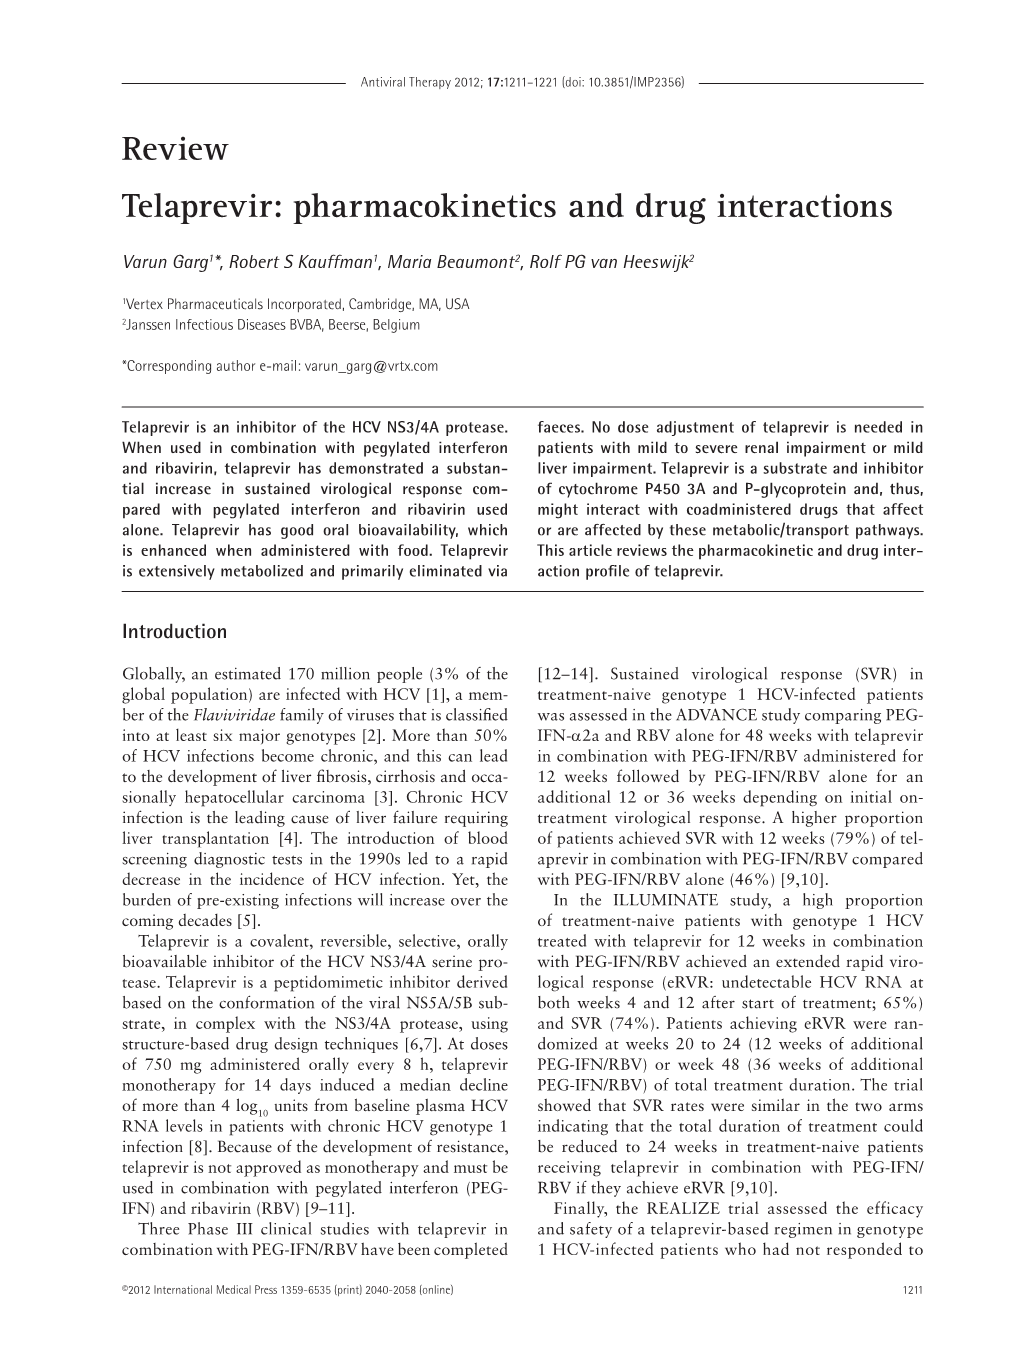 Review Telaprevir: Pharmacokinetics and Drug Interactions